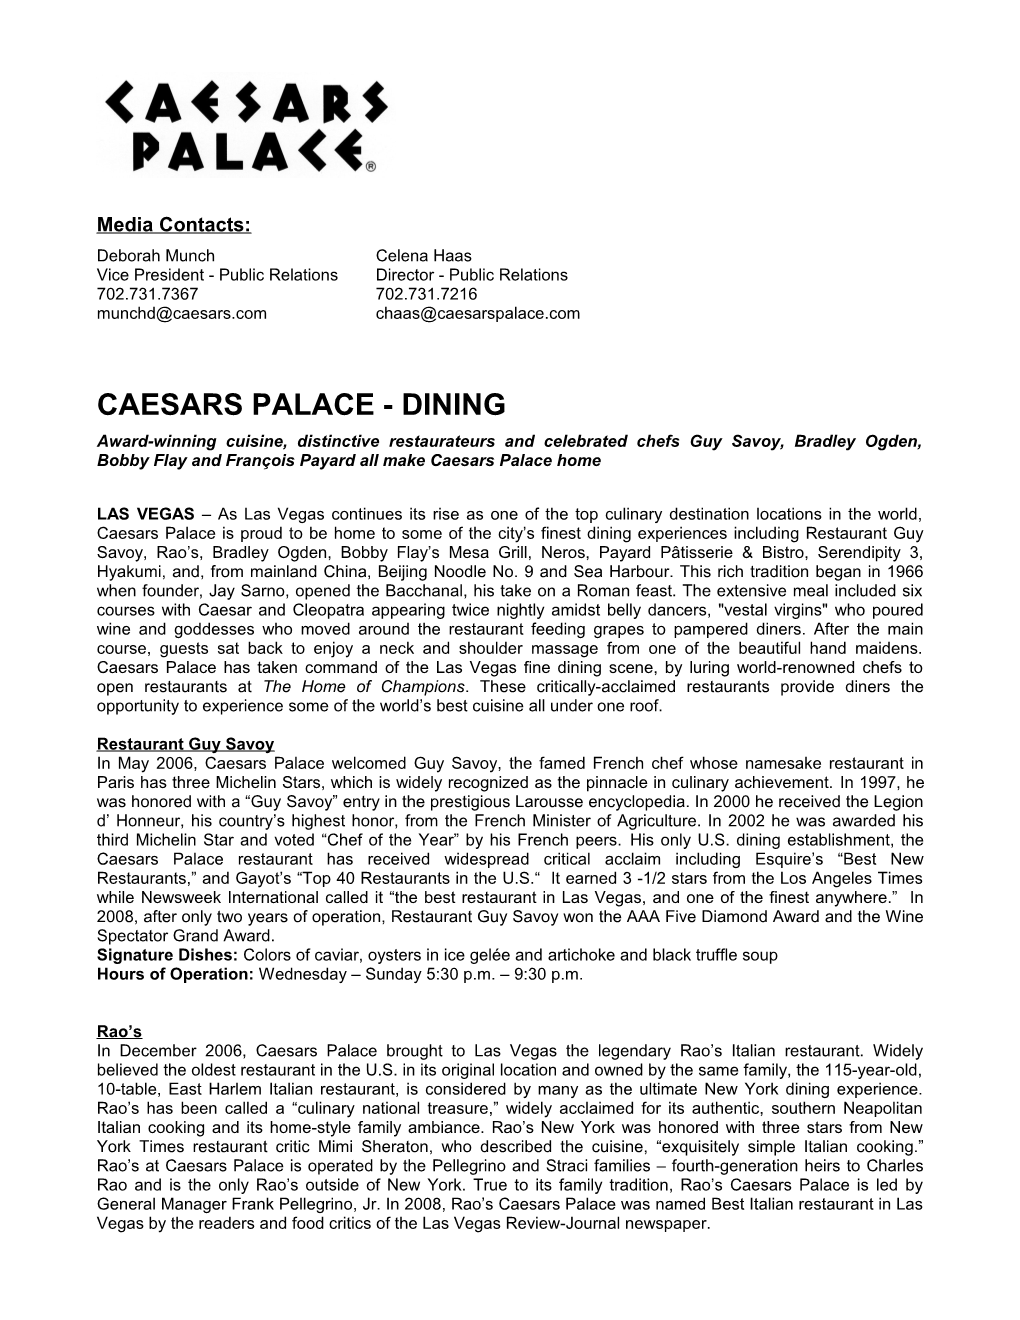 Caesars Palace Is the Leader in Fine-Dining, Dating Back Four Decades Ago When the Bacchanal